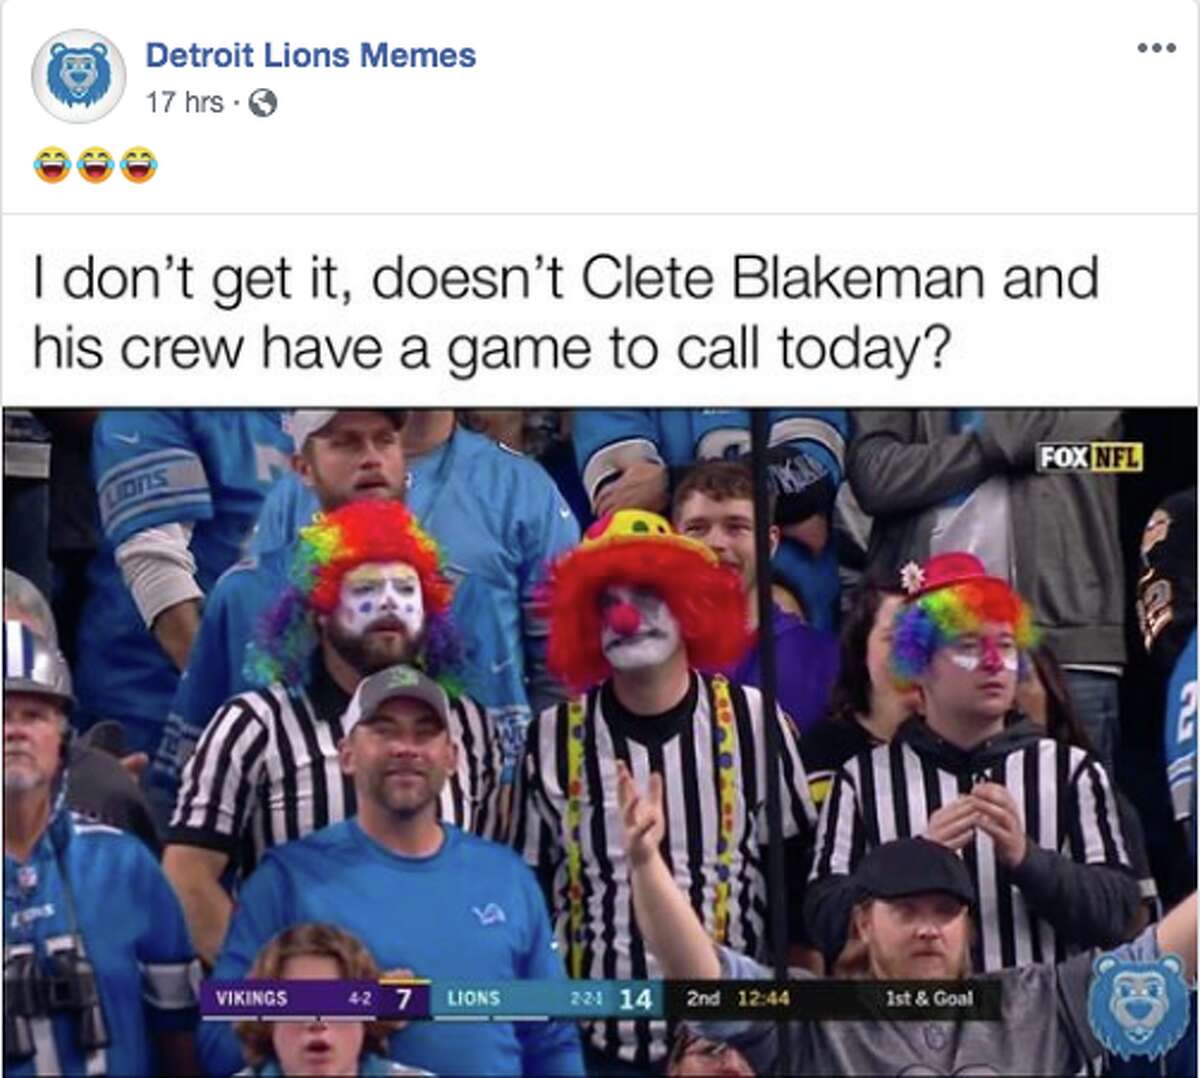 Fans react to the Detroit Lions' loss on Sunday, Oct. 20, 2019 to the Minnesota Vikings.